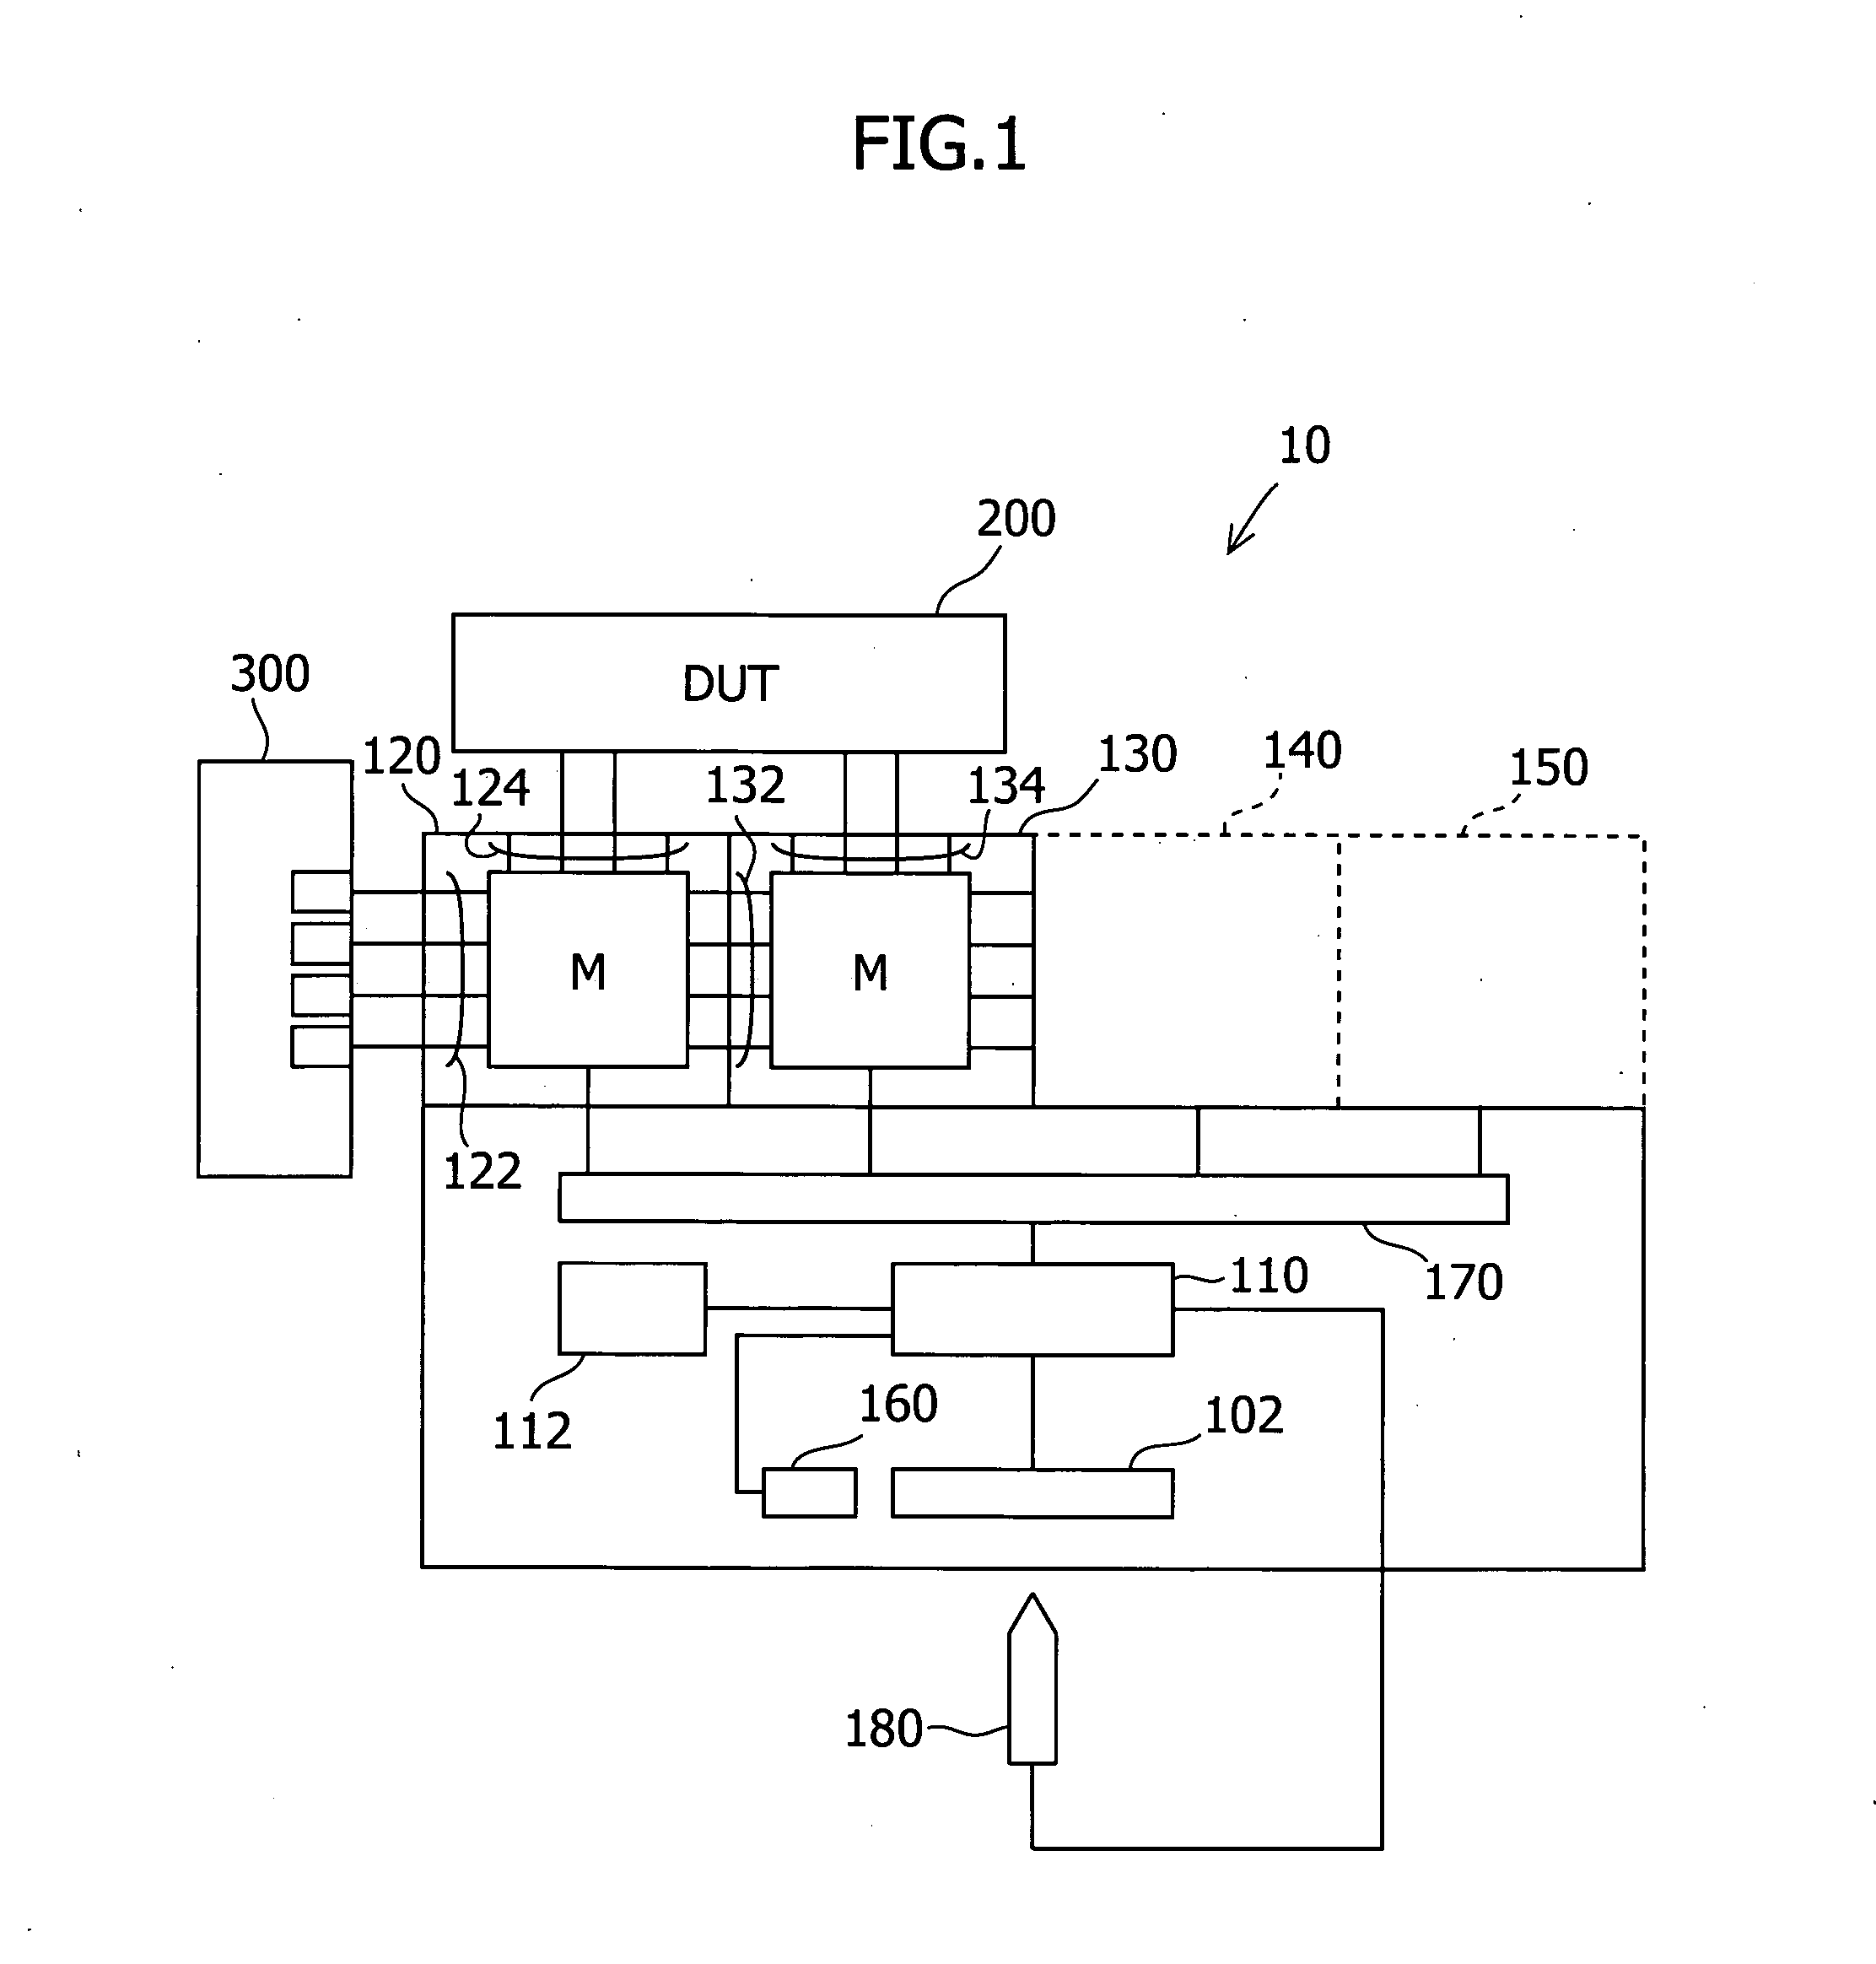 Switching matrix apparatus for semiconductor characteristic measurement apparatus